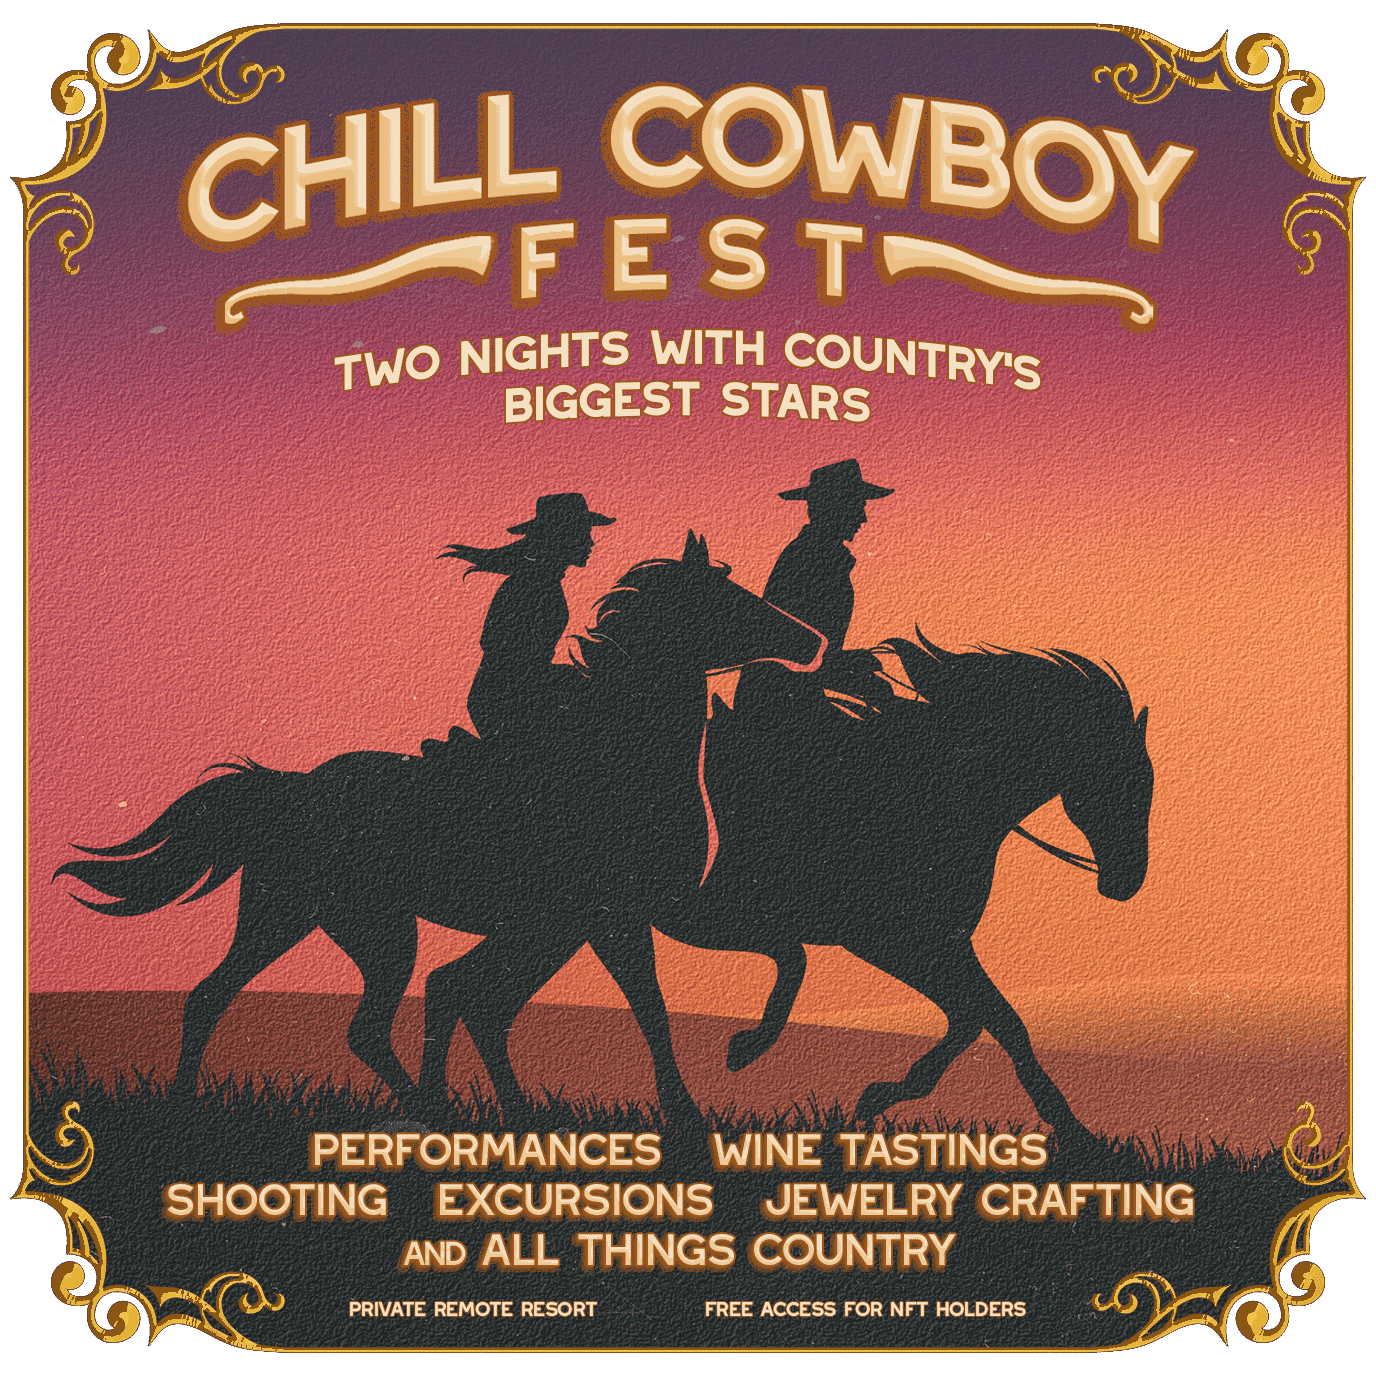 Chill Cowboy Fest NFT event digital poster created by Bryan Kelley and Brittney Kelley